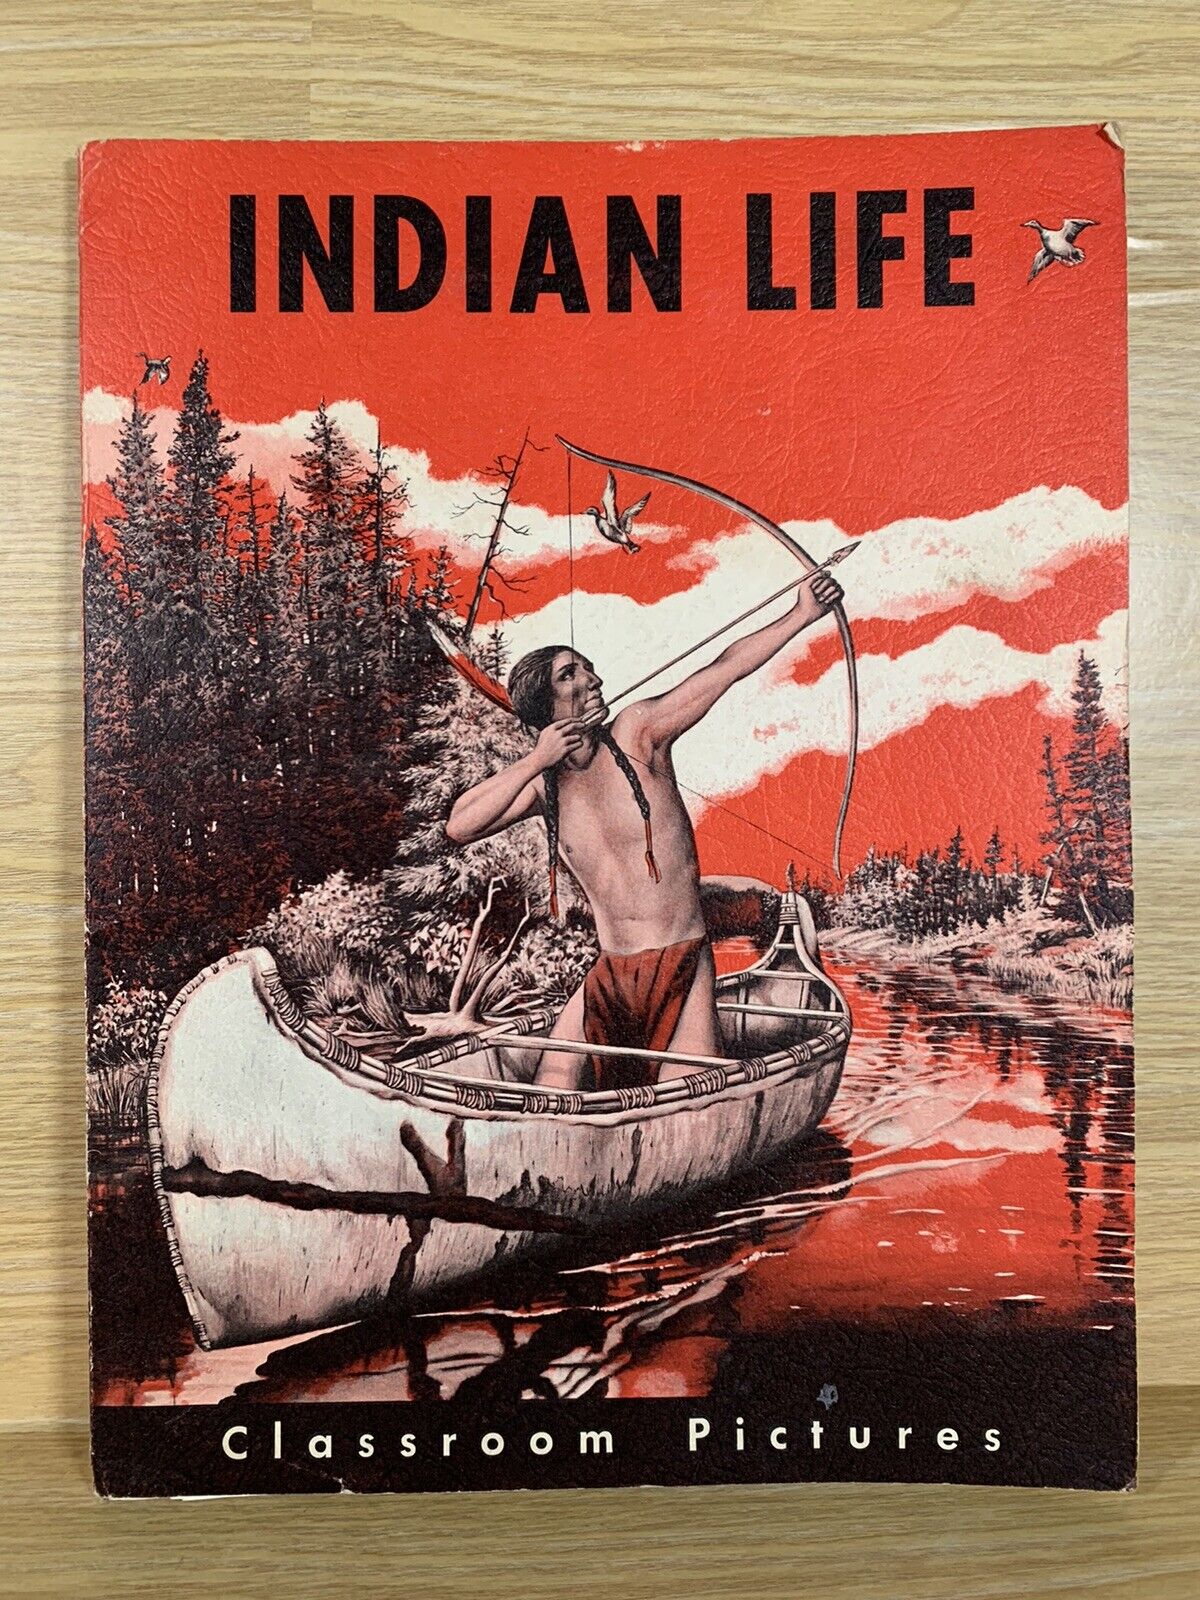 RARE 1961 Indian Life Classroom Picture By Clark Wissler Informative Classroom